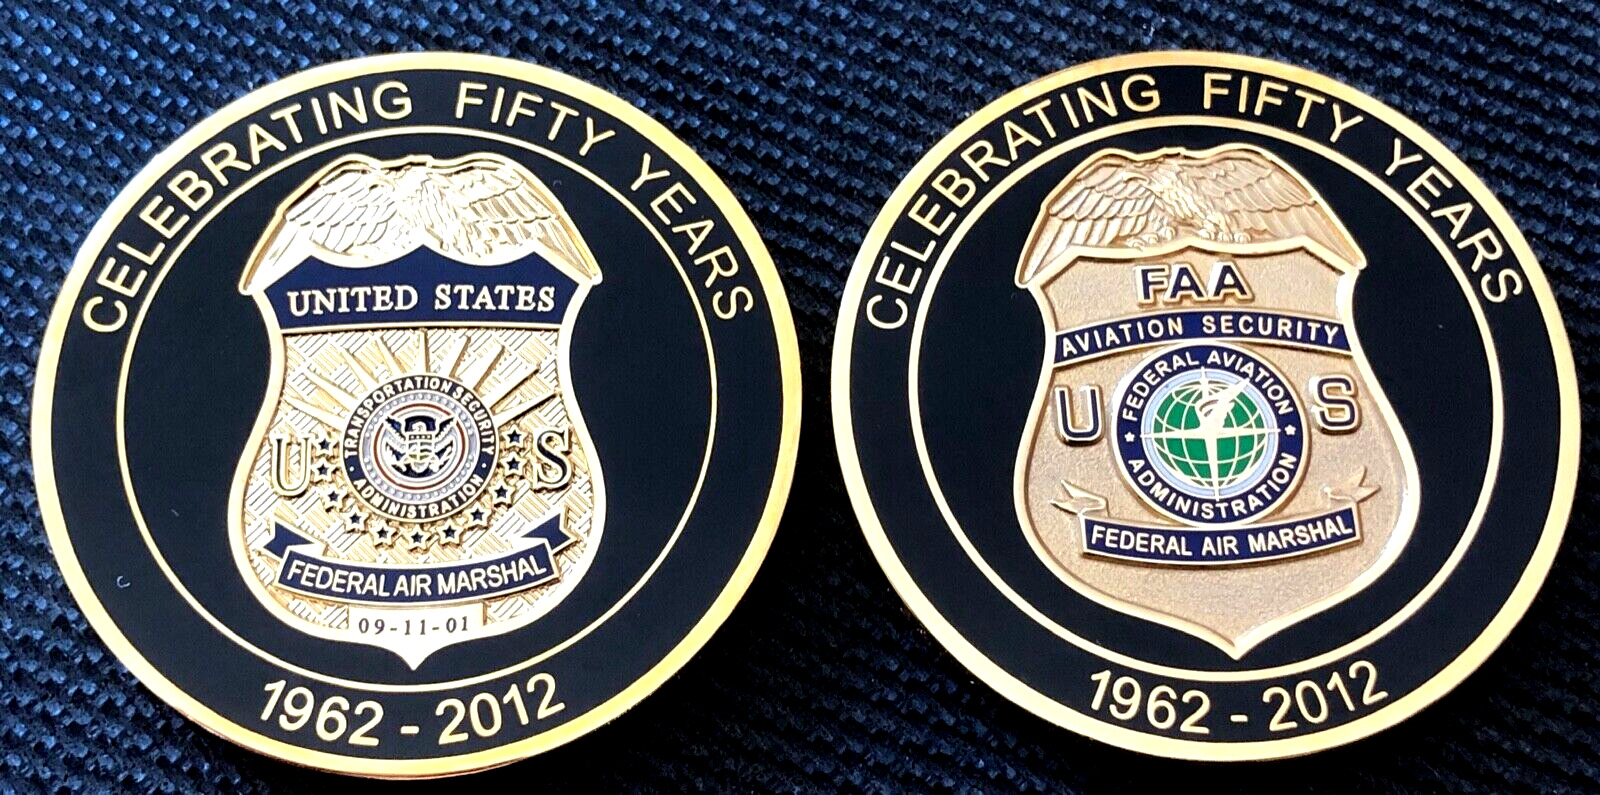 FAMS - Federal Air Marshal Service 50th Anniversary 1.75in challenge coin